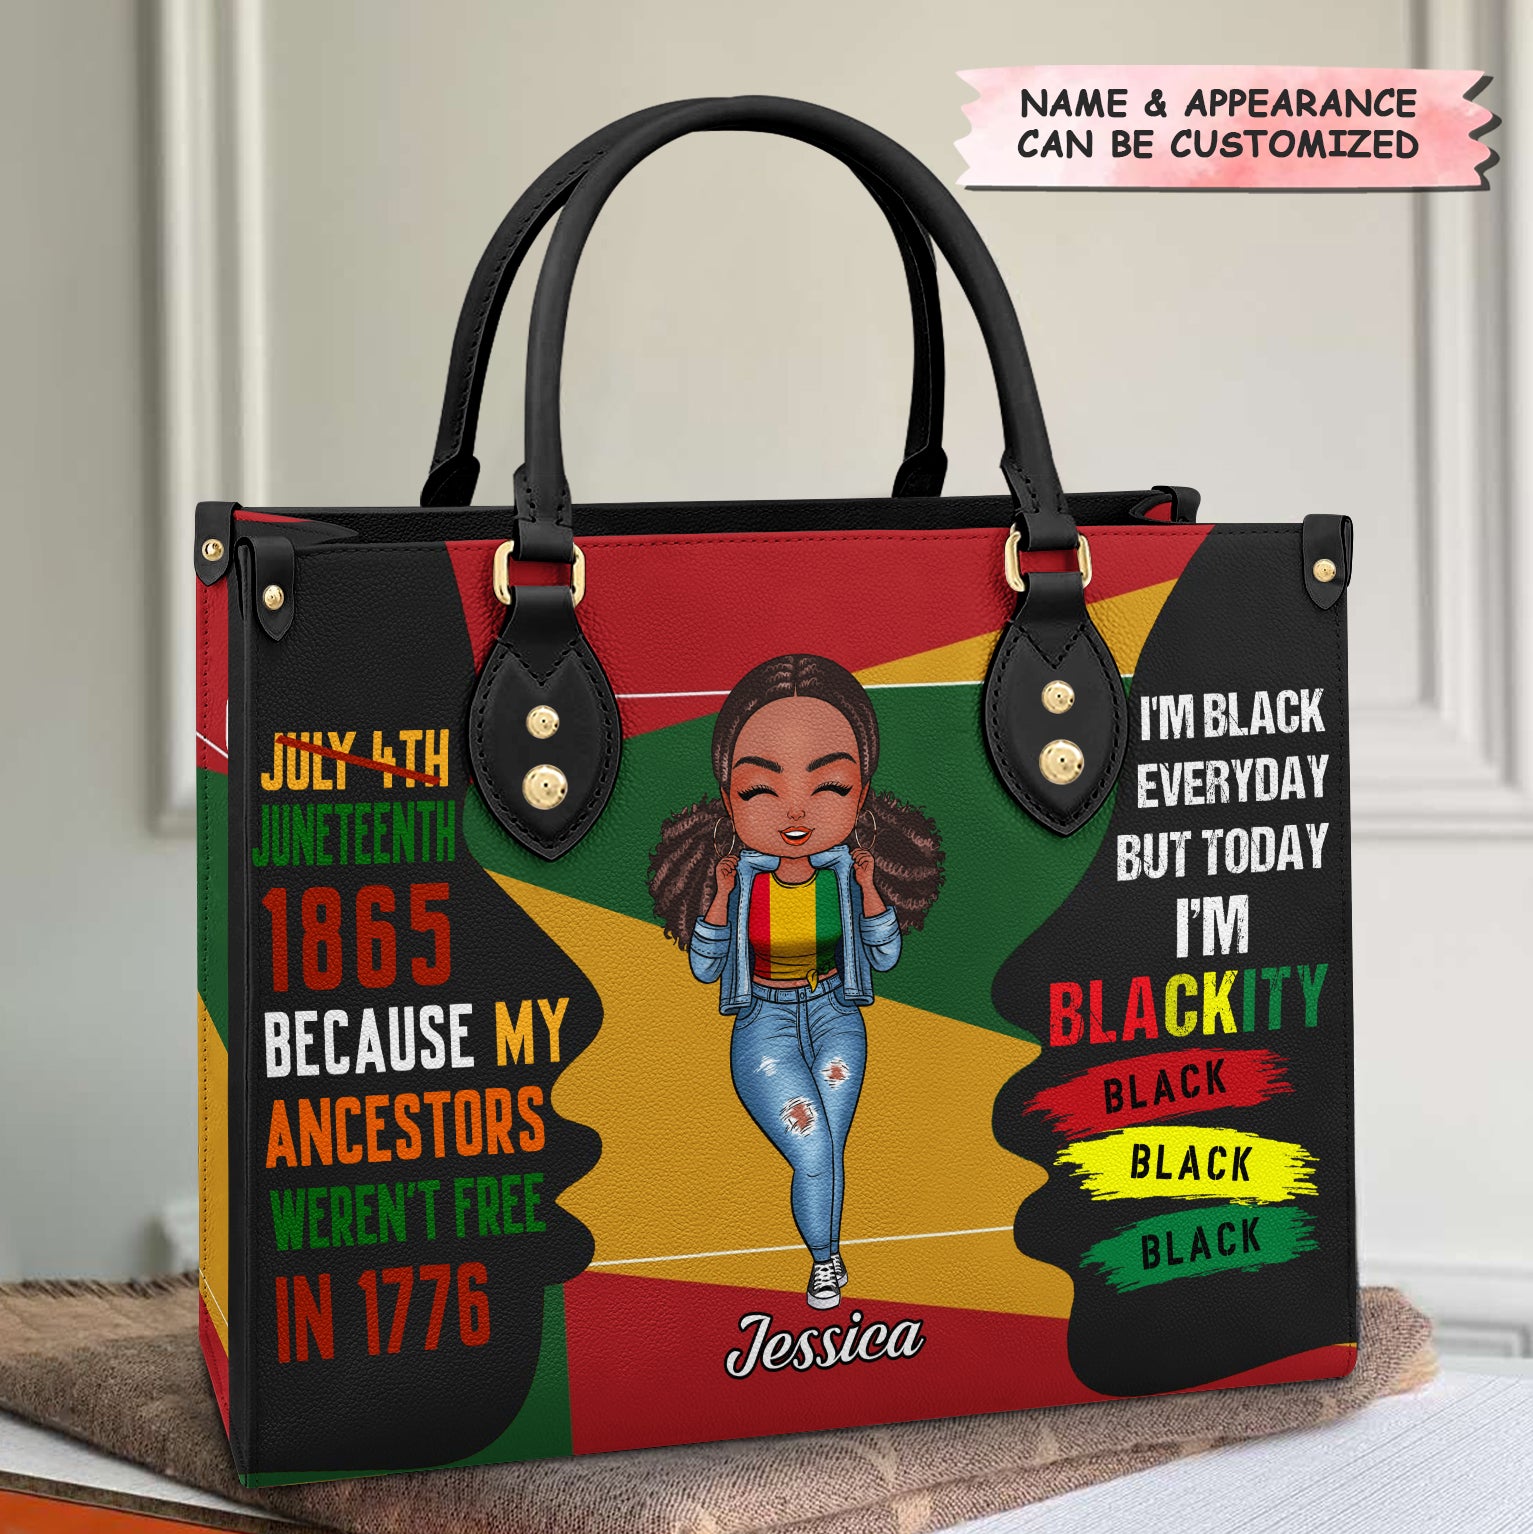 Personalized Leather Bag - Gift For Black Woman - Juneteenth 1865 Because My Ancestors Weren't Free In 1776